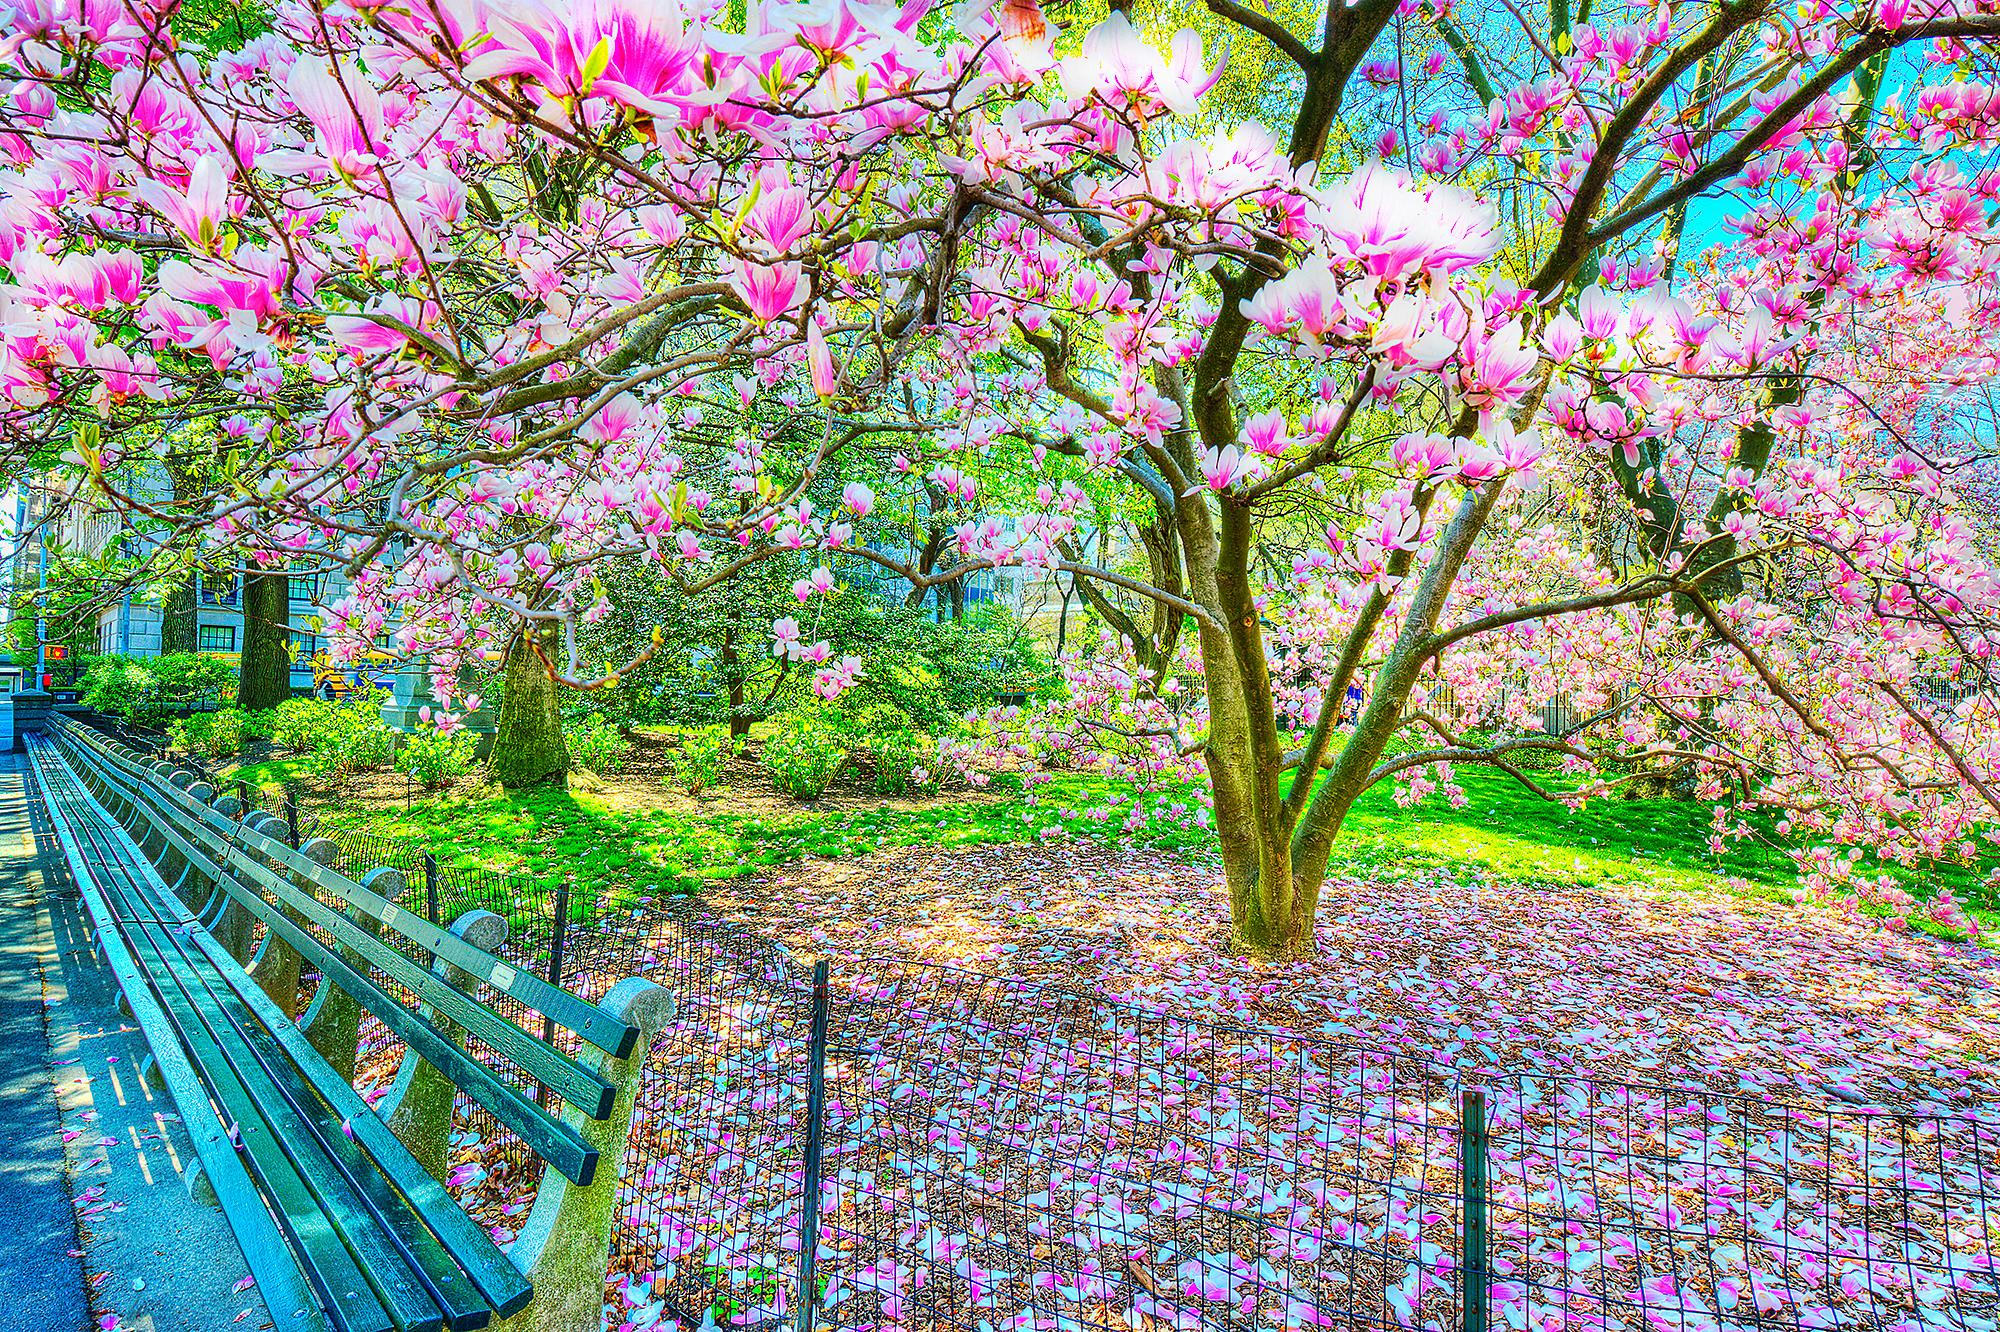 Blooming Magnolia Tree In Spring, Central Park  New York City in Pinks and Blues